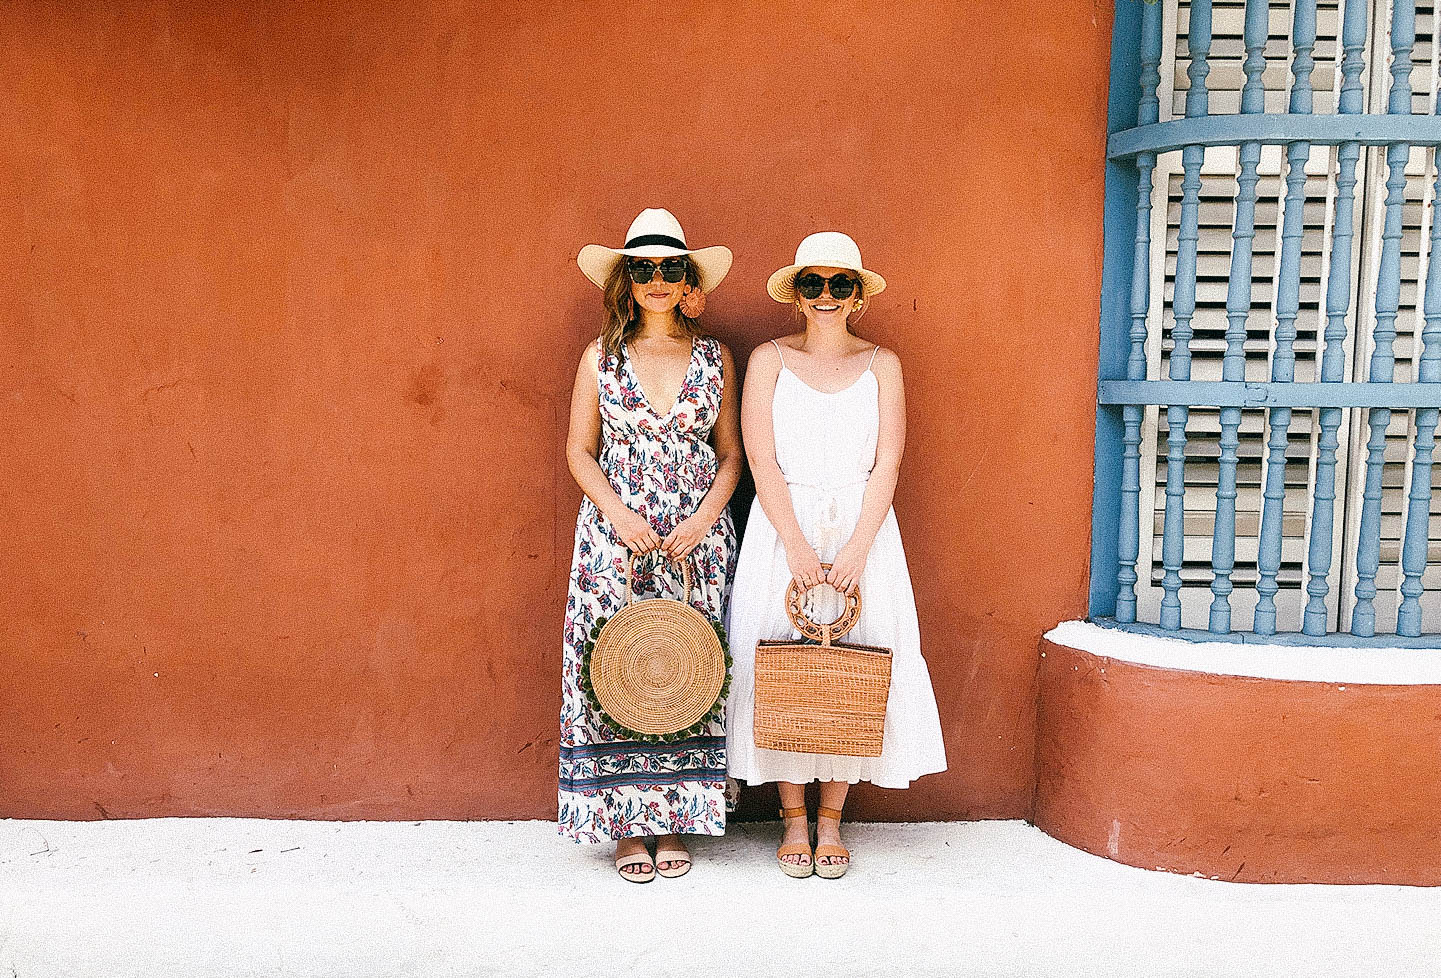 4-Night Cartagena Itinerary | COLOR by K